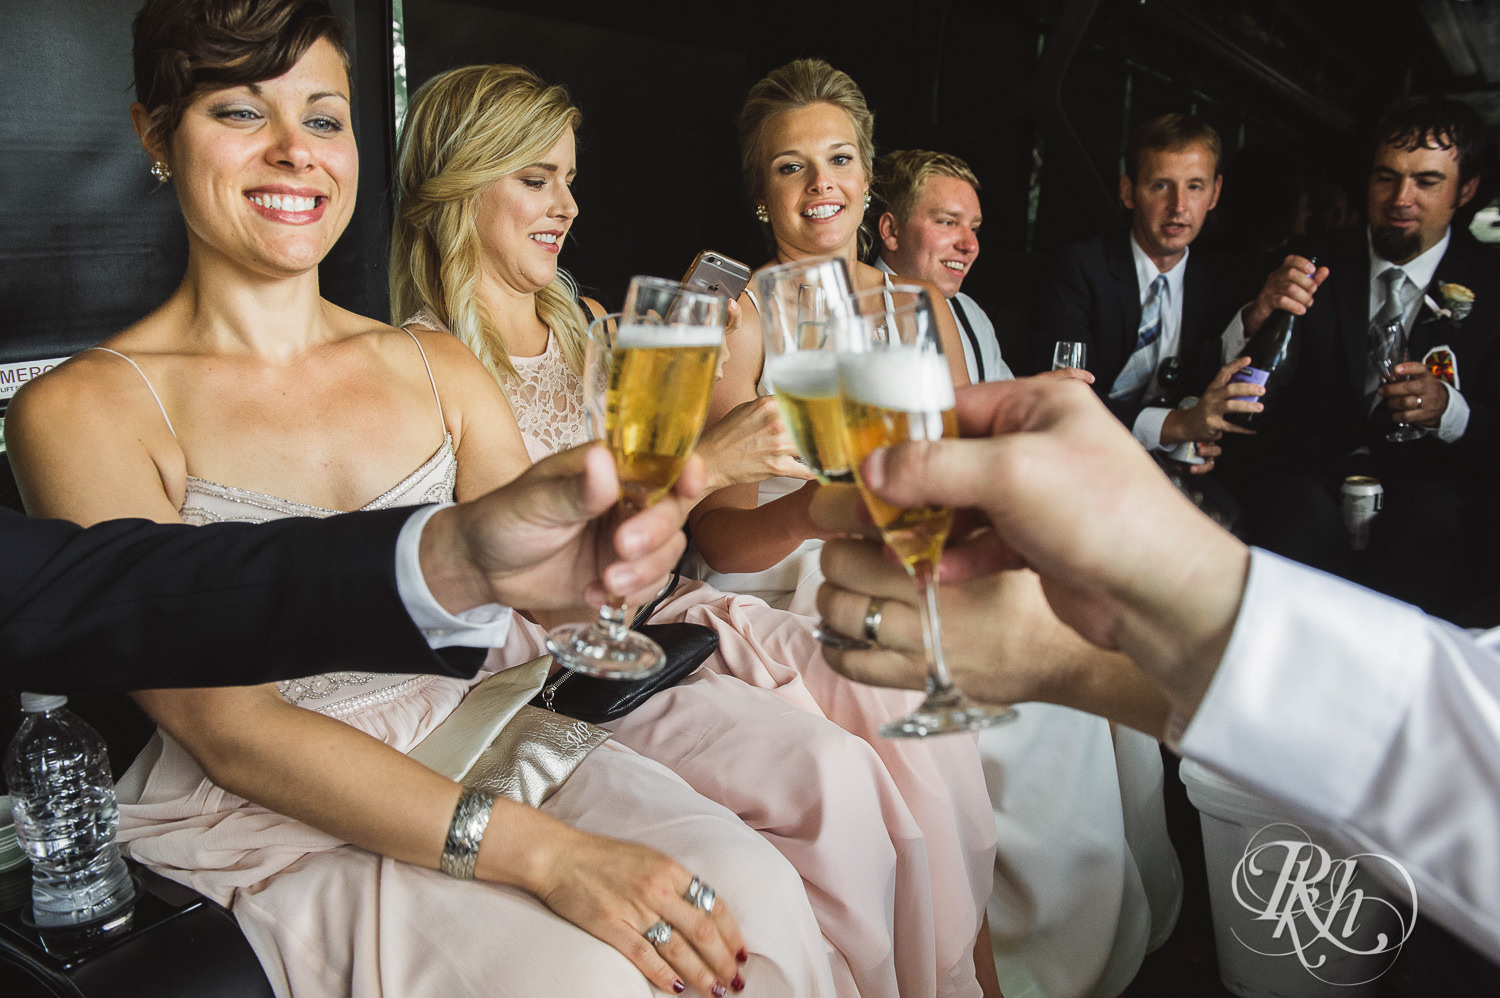 Wedding party drinks on party bus in Minneapolis, Minnesota.